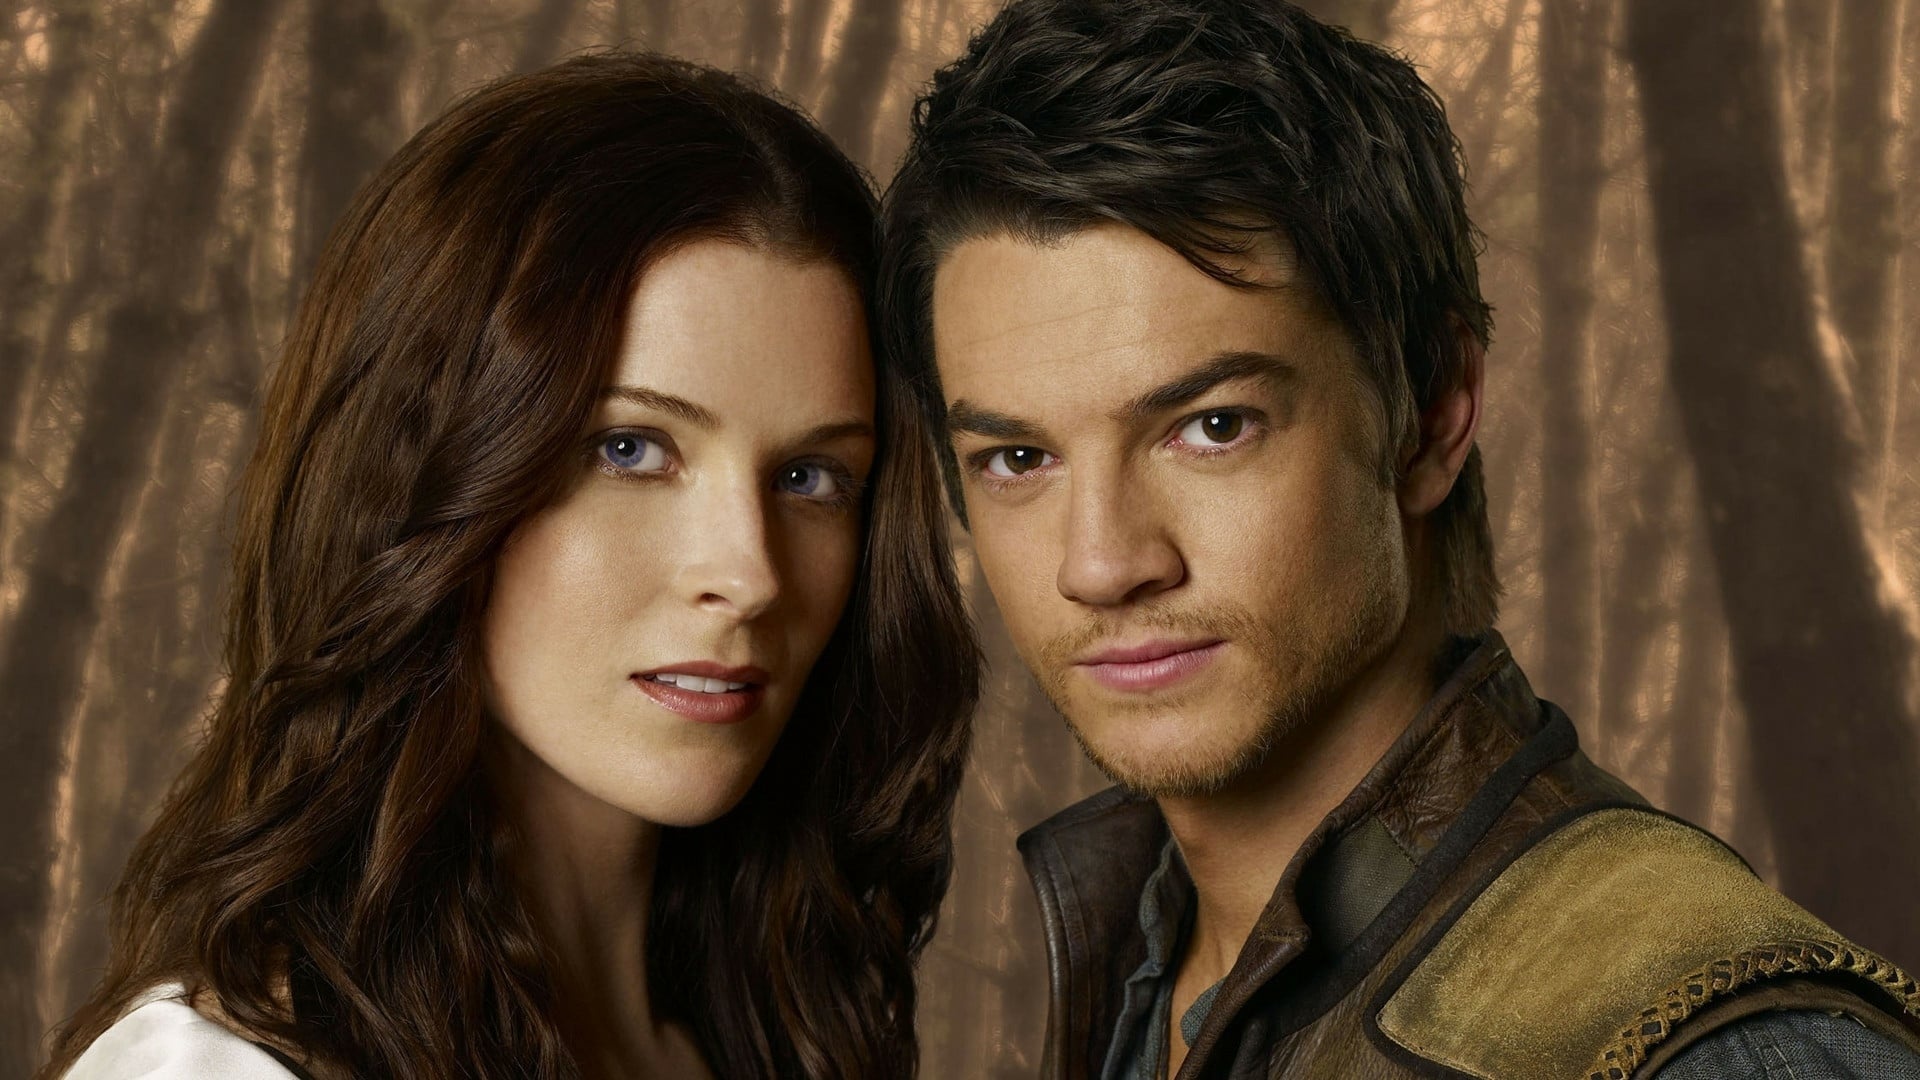 Legend of the Seeker (TV Series): The main characters of the Renaissance Pictures original television show. 1920x1080 Full HD Wallpaper.